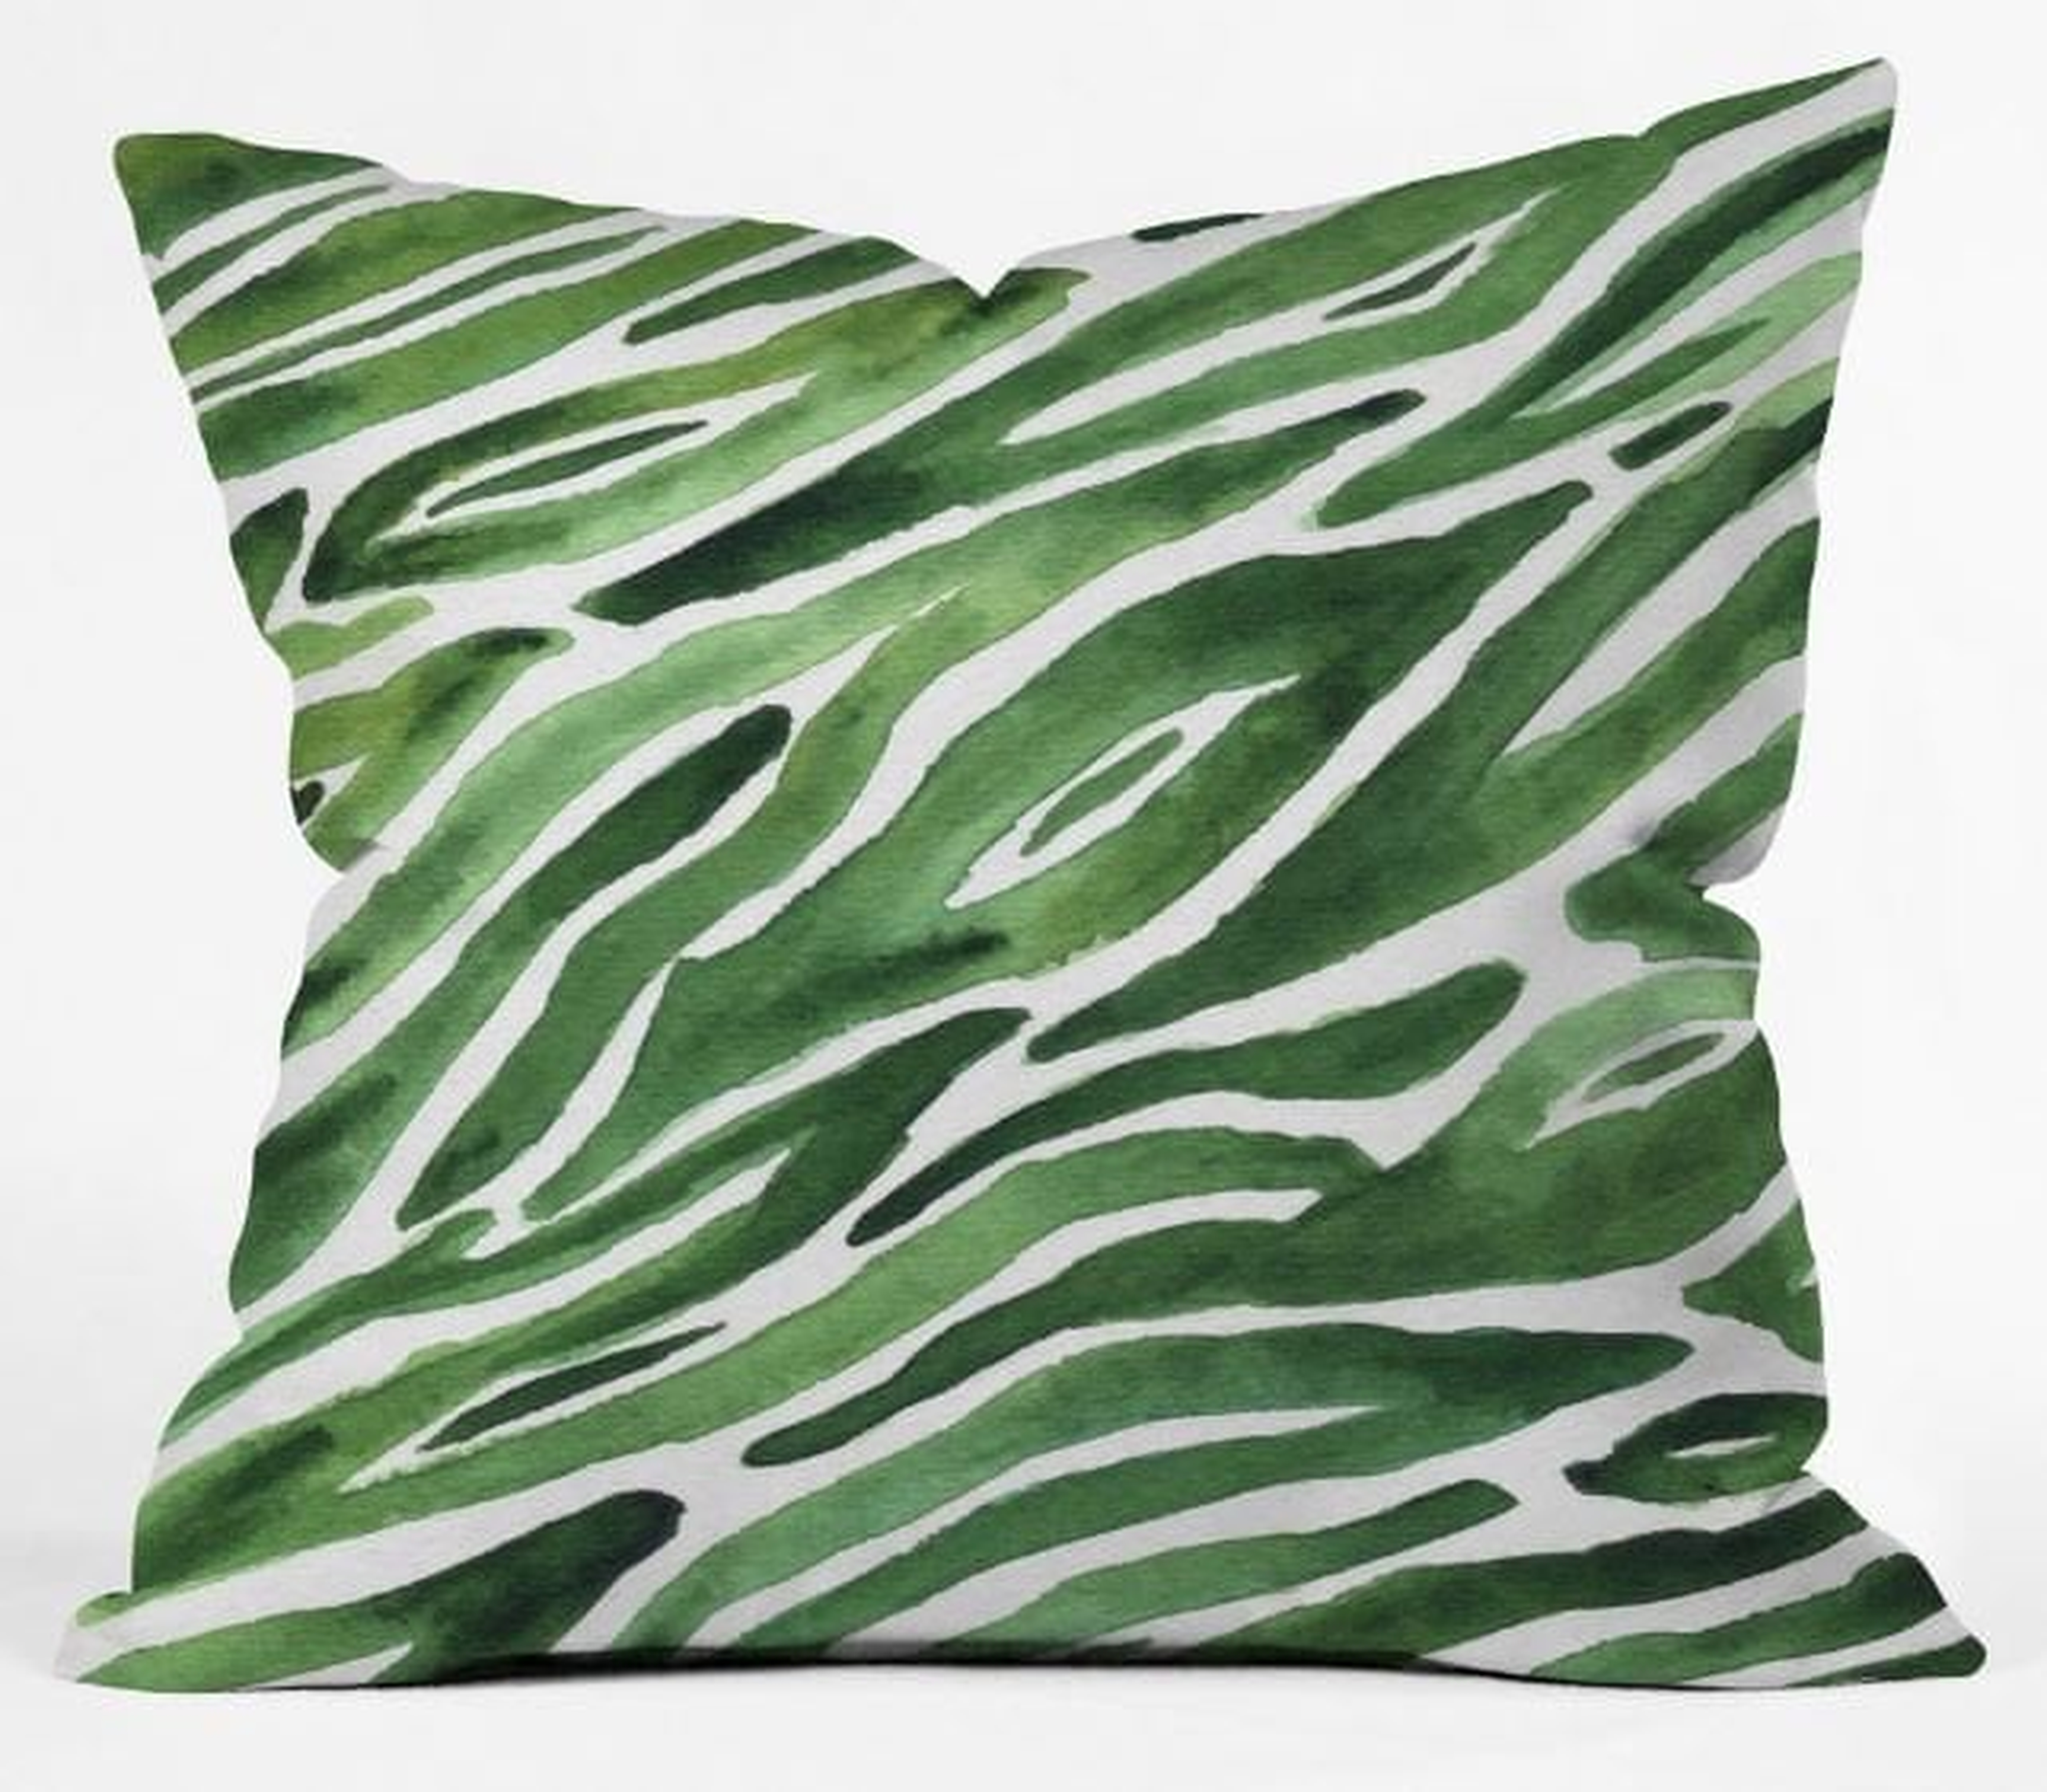 Green Flow Throw Pillow 20x20 with insert - Deny Designs